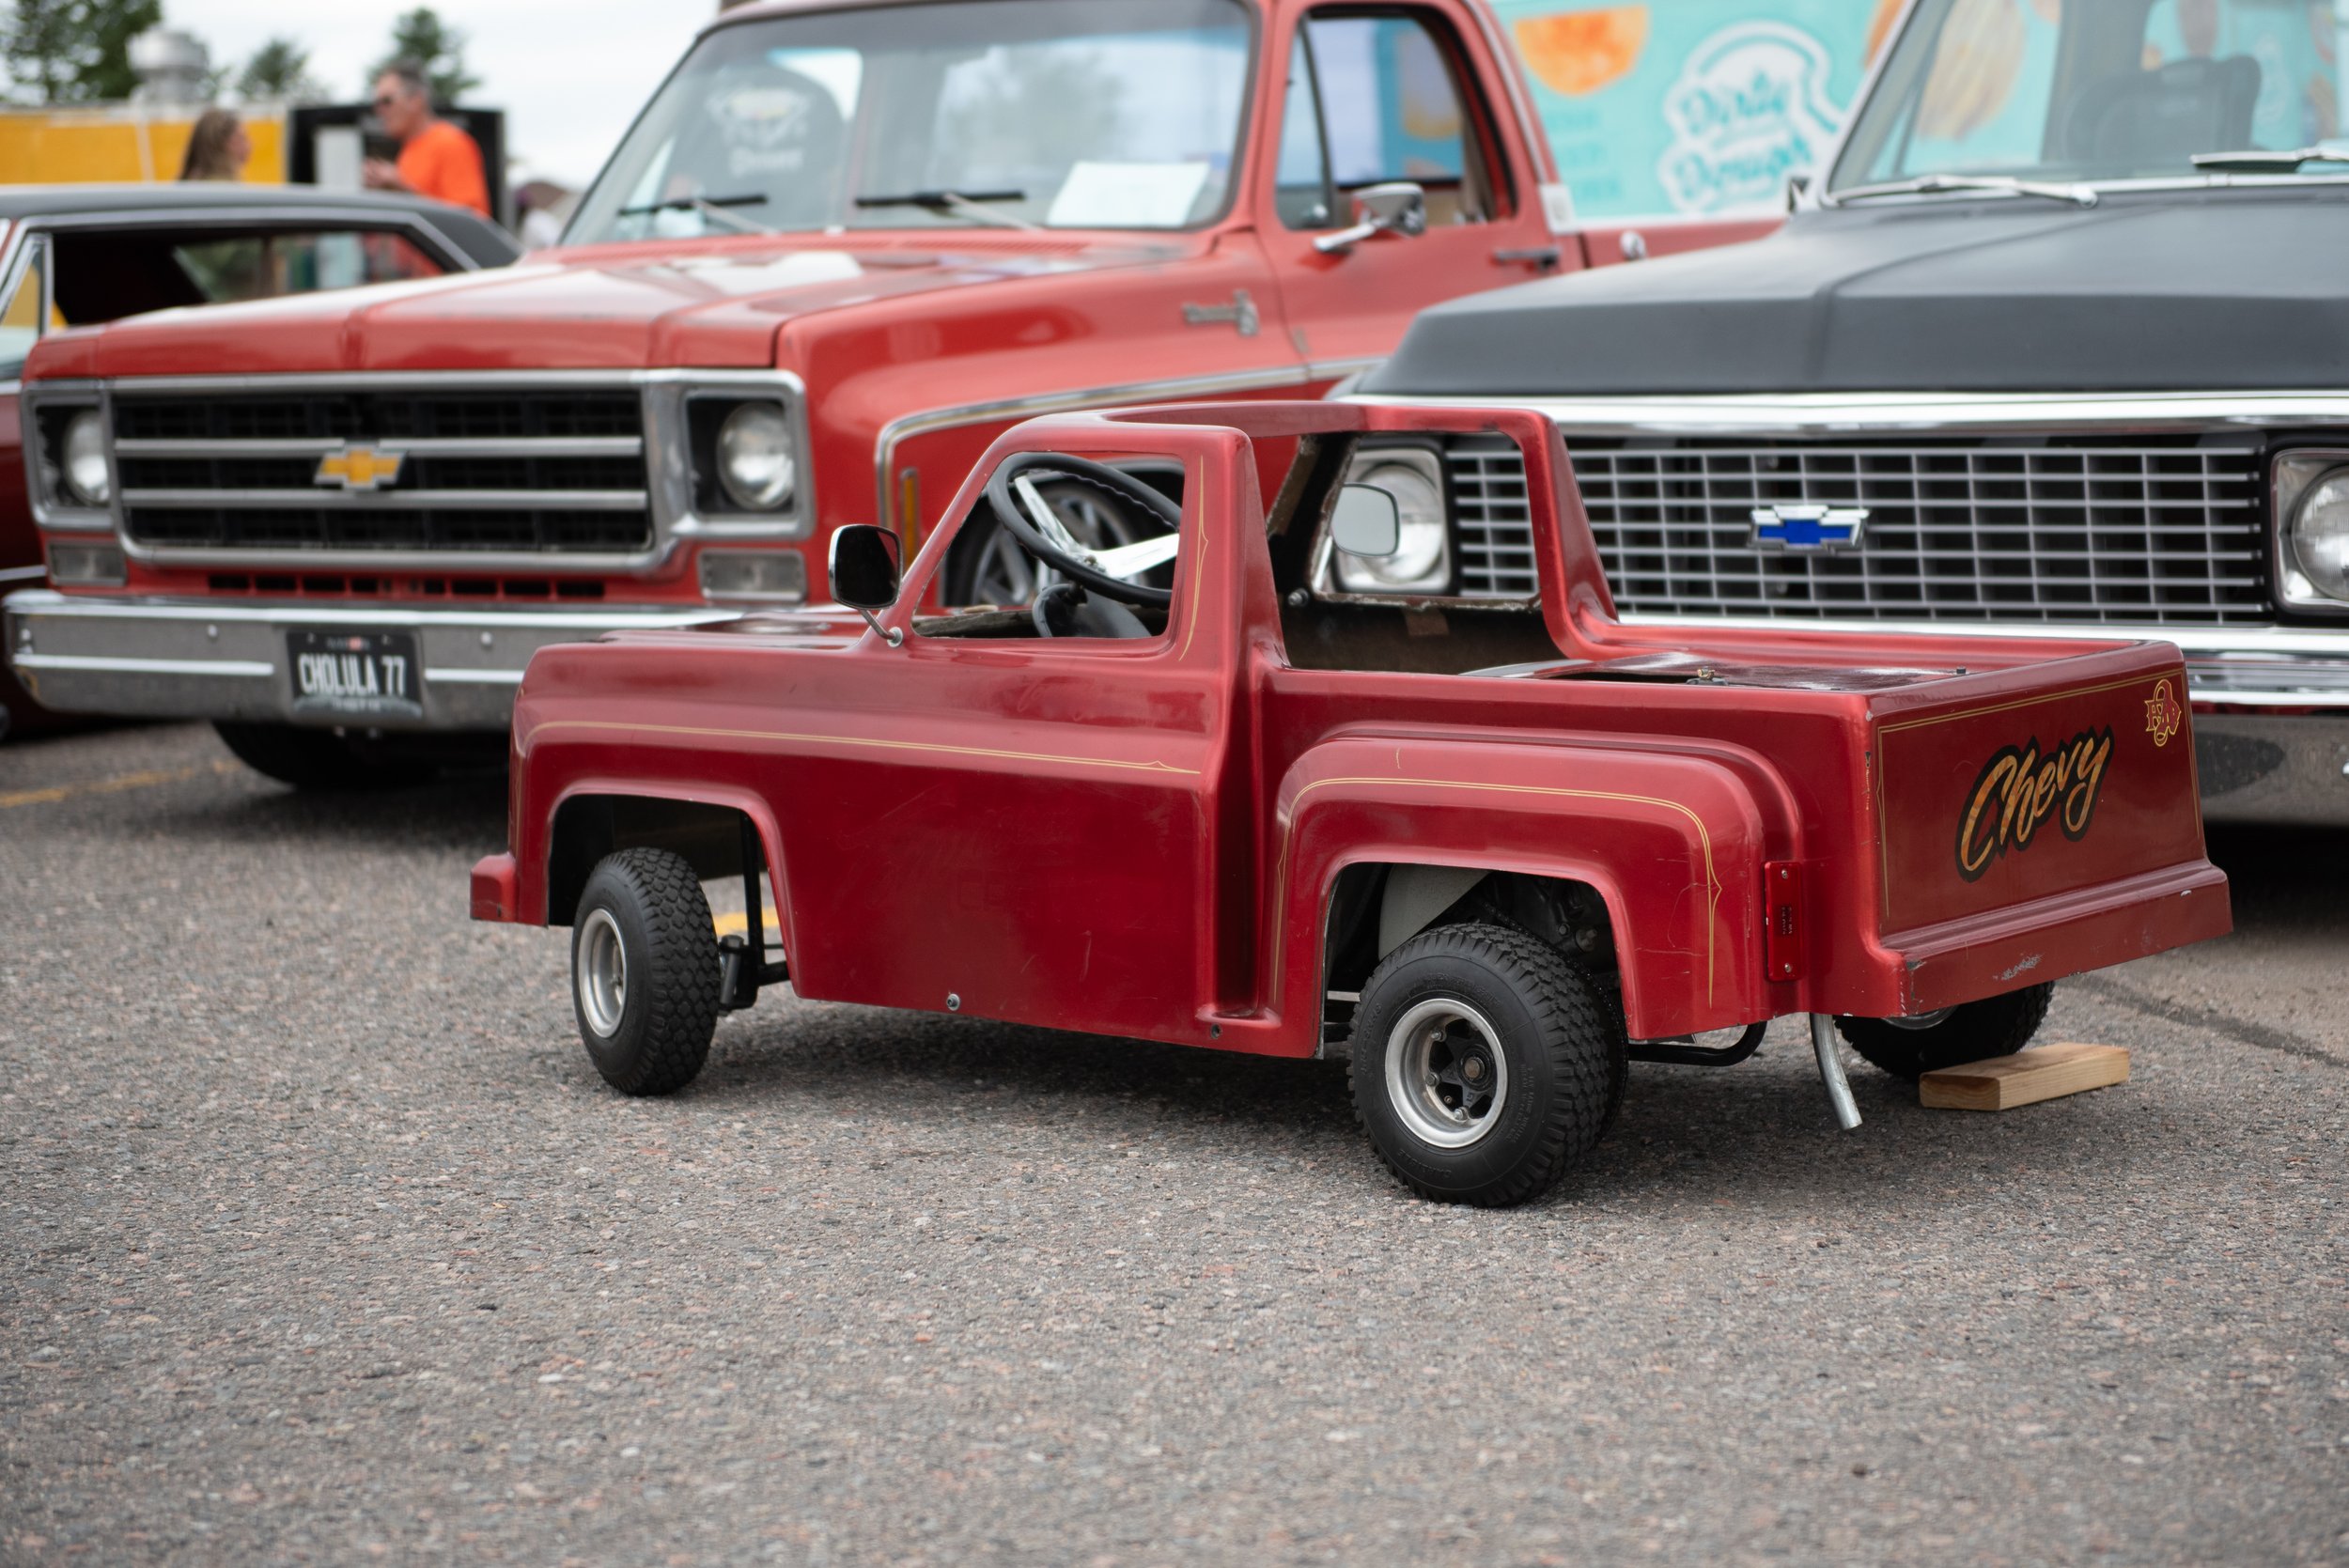  Photo: Adrian Michael  A miniture Chevy Bonanzo toy truck is parked next to a full sized 1976 Chevy Bonanzo truck. 